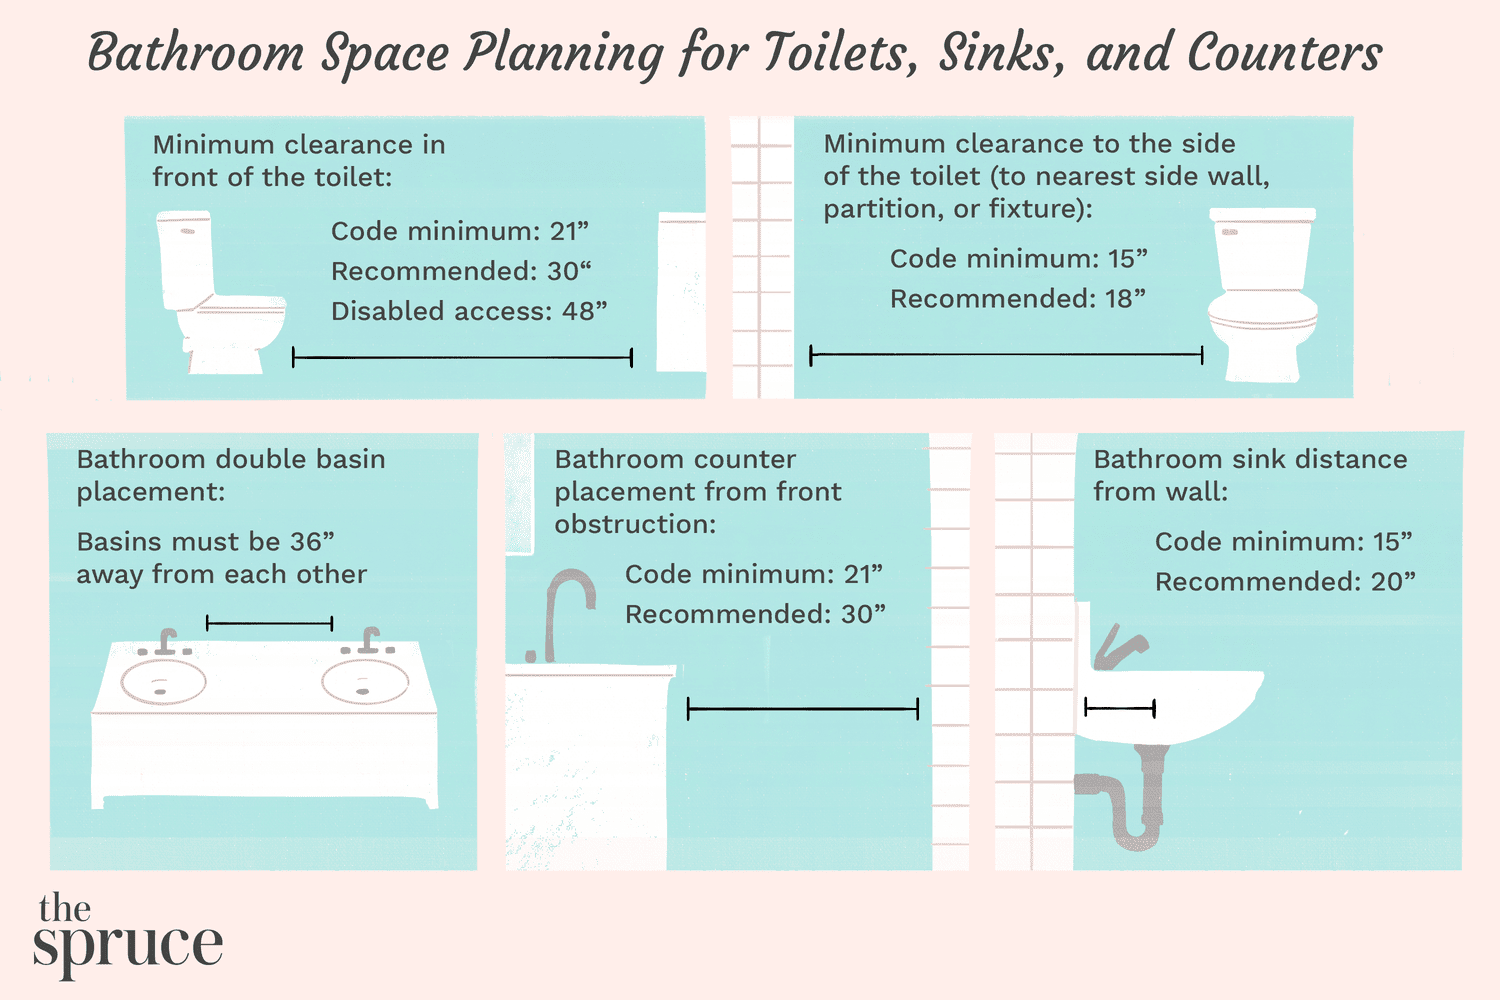 Bathroom Space Planning for Toilets, Sinks, and Counters